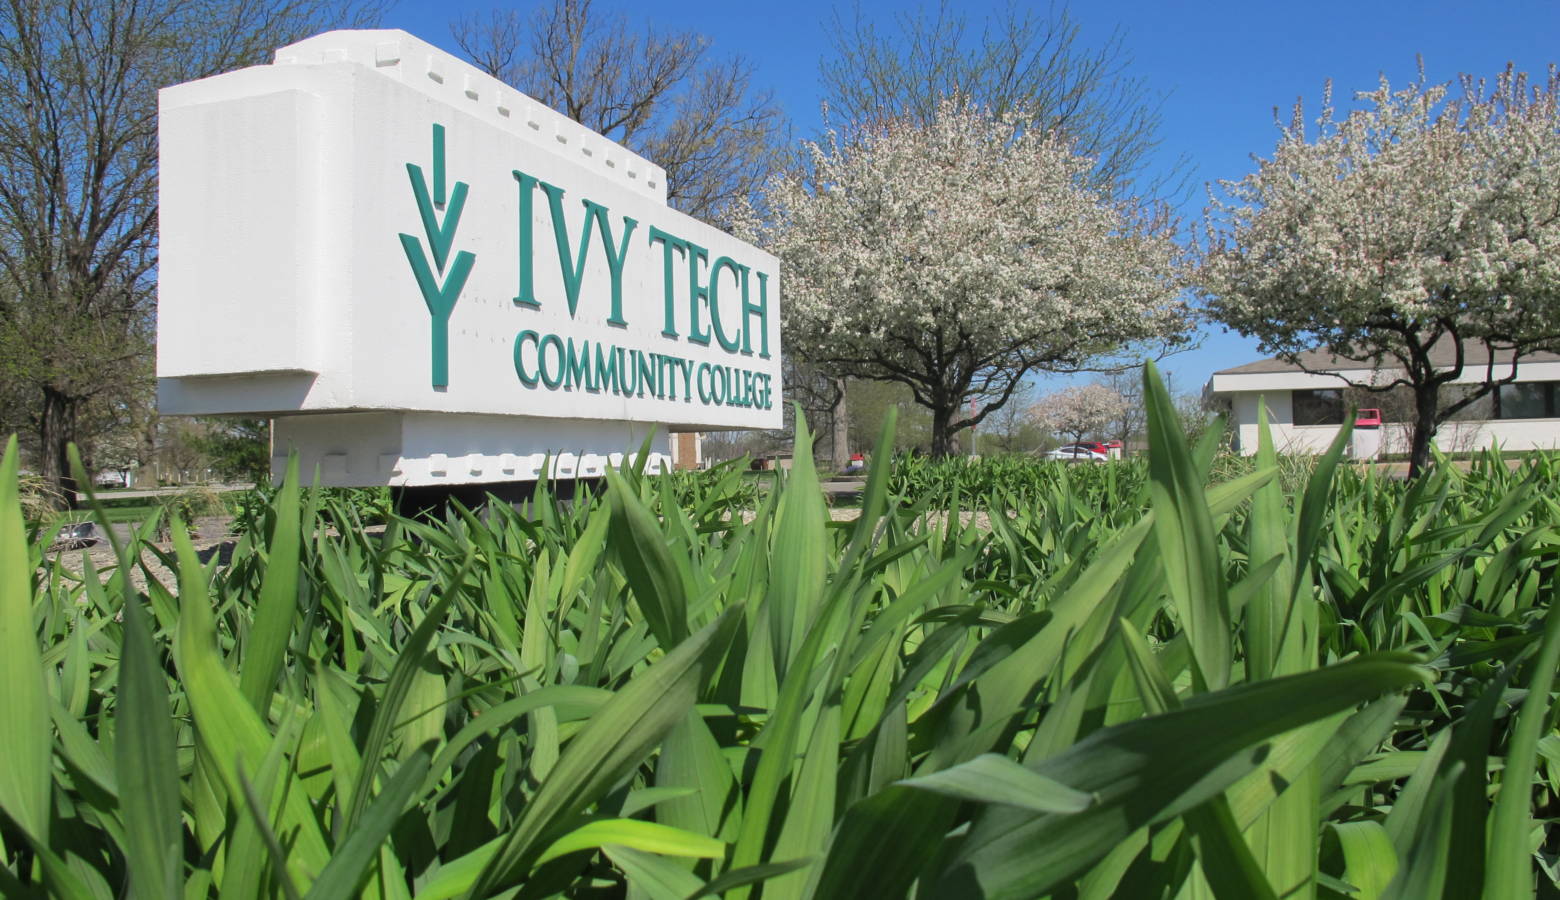 Ivy Tech Community College will undergo administrative changes to focus more on individual communities. (Kyle Stokes/Stateimpact Indiana)